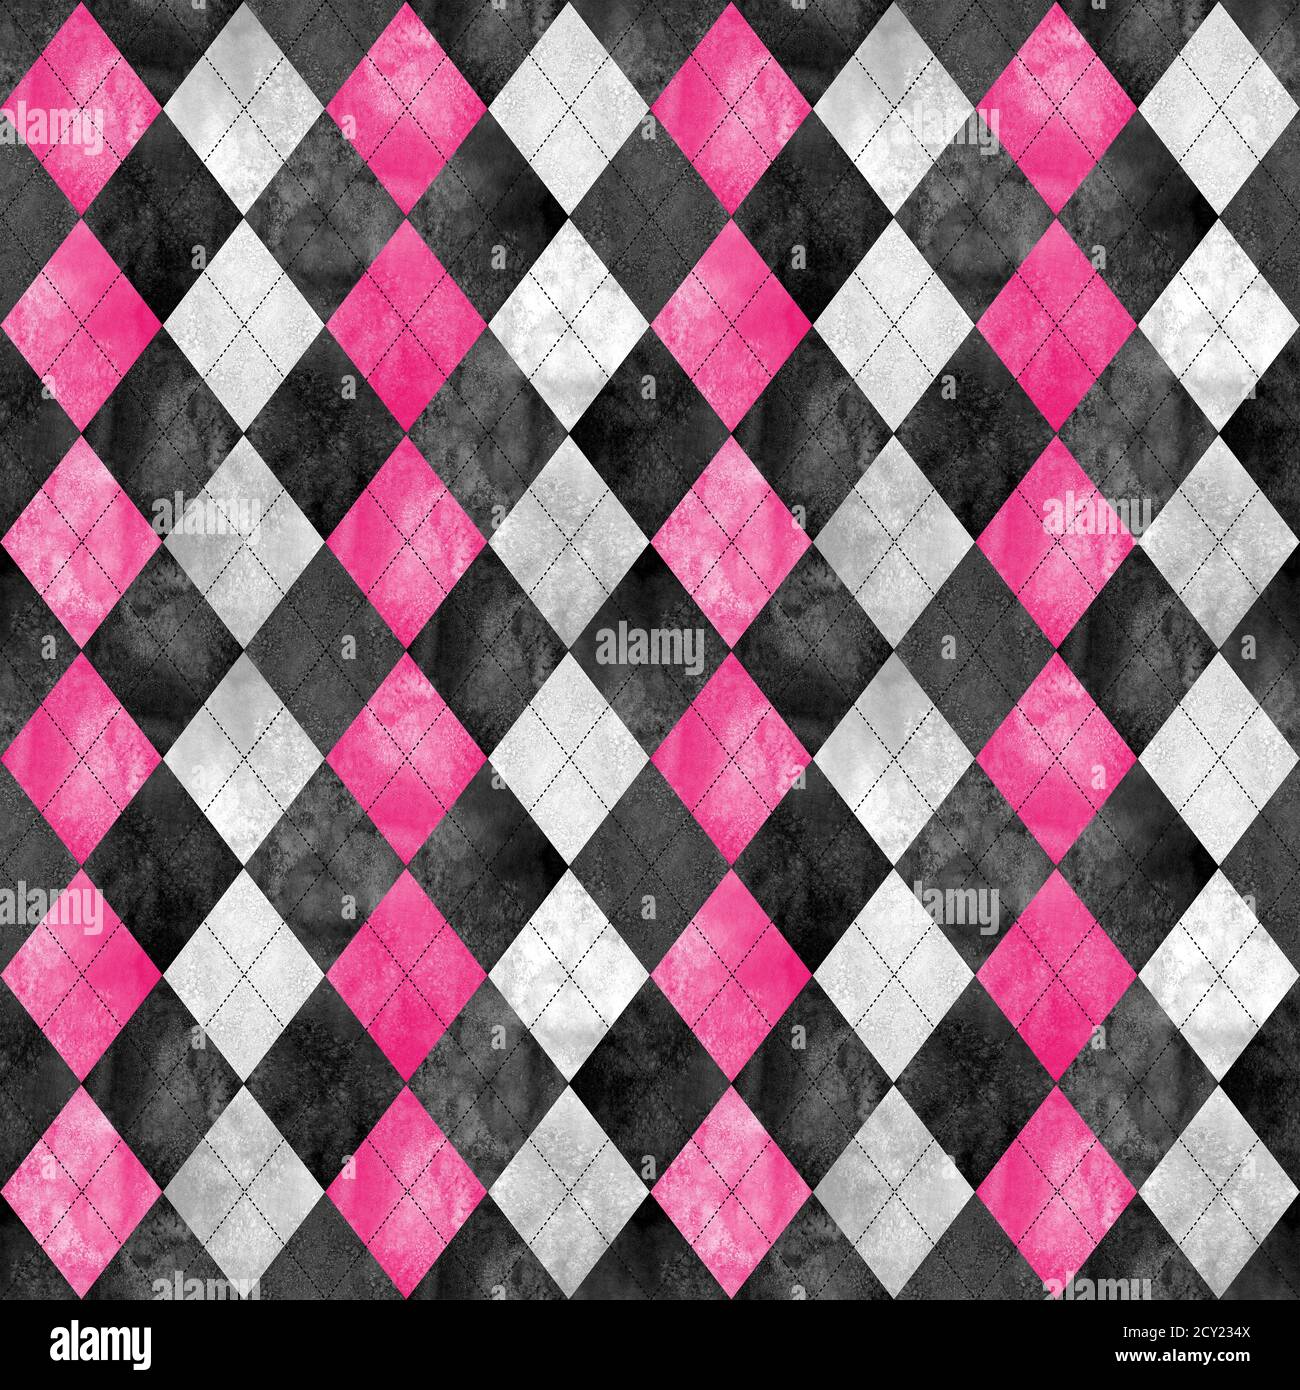 Argyle seamless plaid pattern. Watercolor hand drawn black gray pink texture background. Watercolour diamond shapes background. Print for cloth design Stock Photo